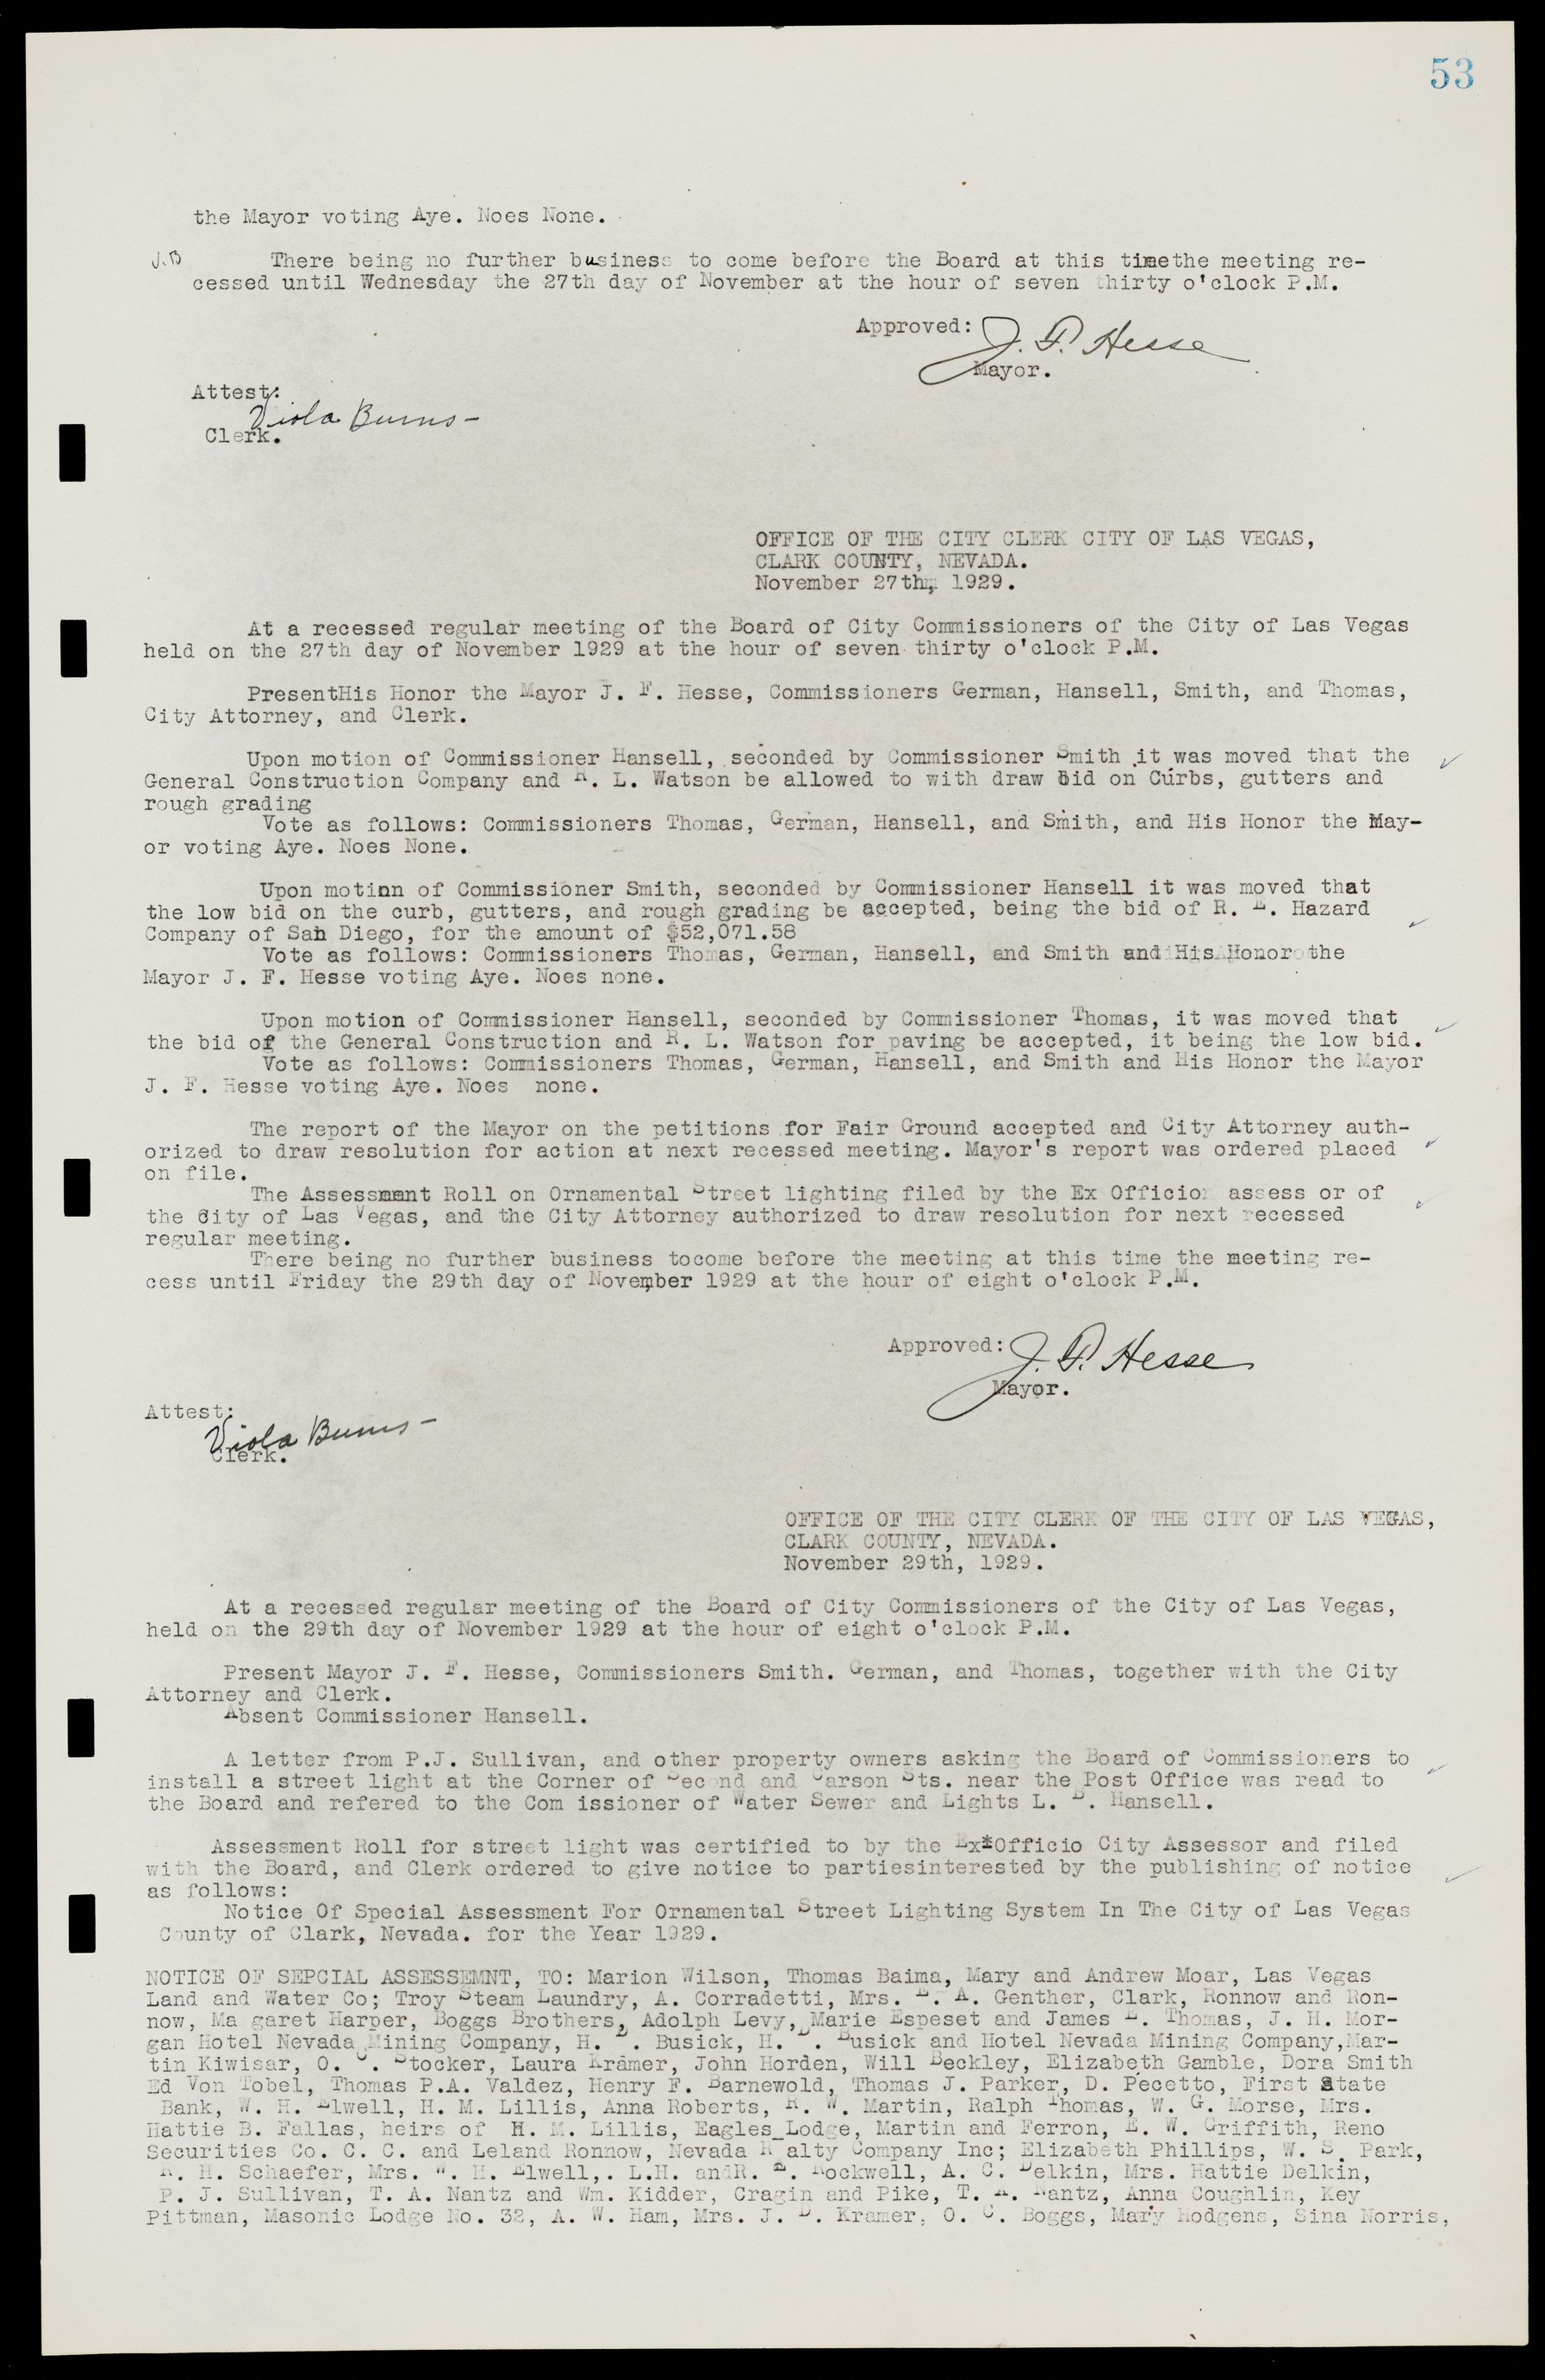 Las Vegas City Commission Minutes, May 14, 1929 to February 11, 1937, lvc000003-59